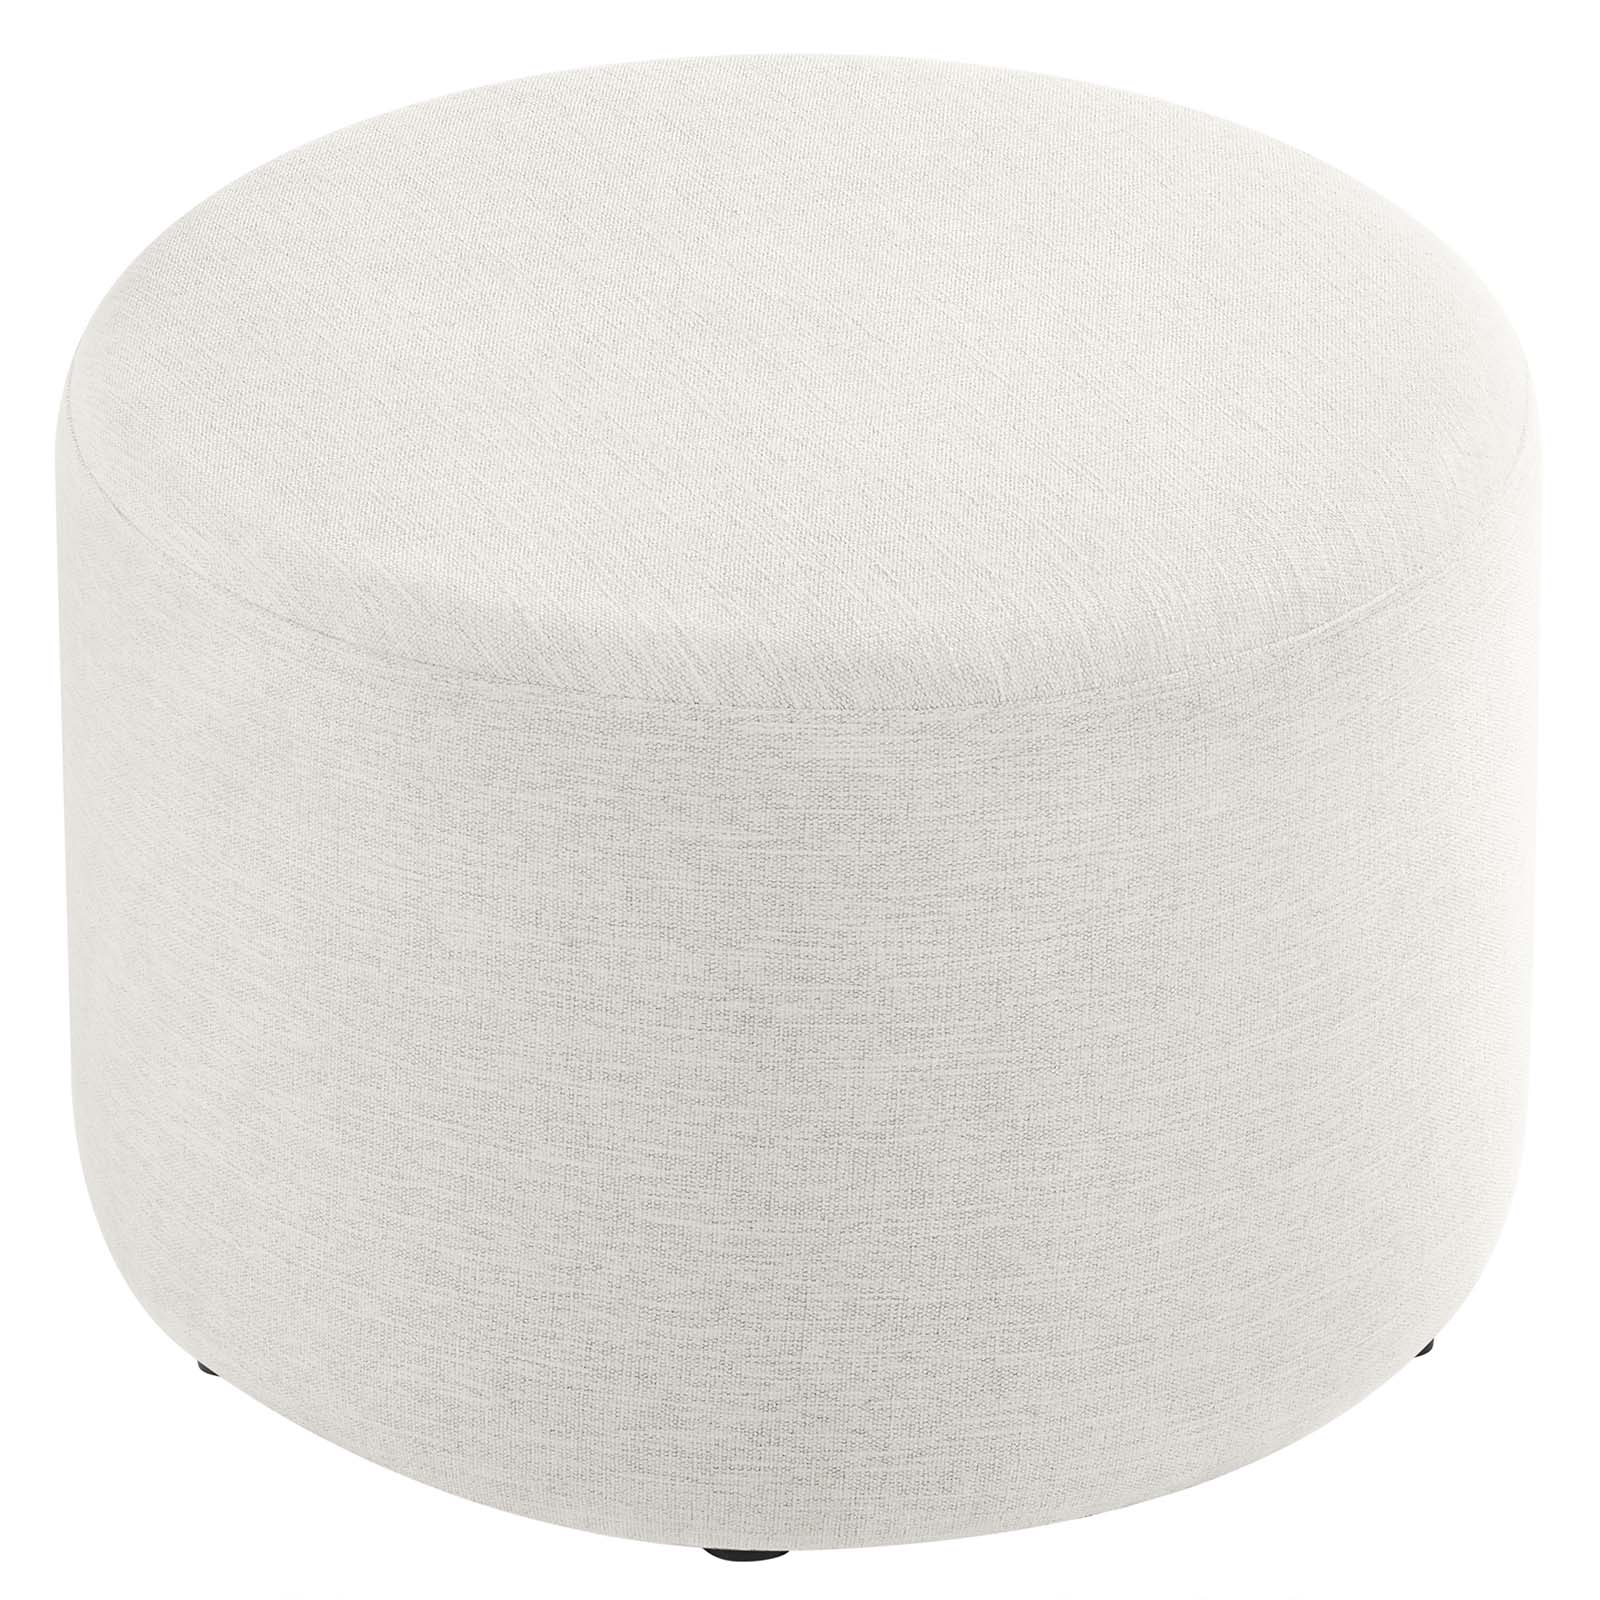 Callum Large 23" Round Woven Heathered Fabric Upholstered Ottoman - East Shore Modern Home Furnishings